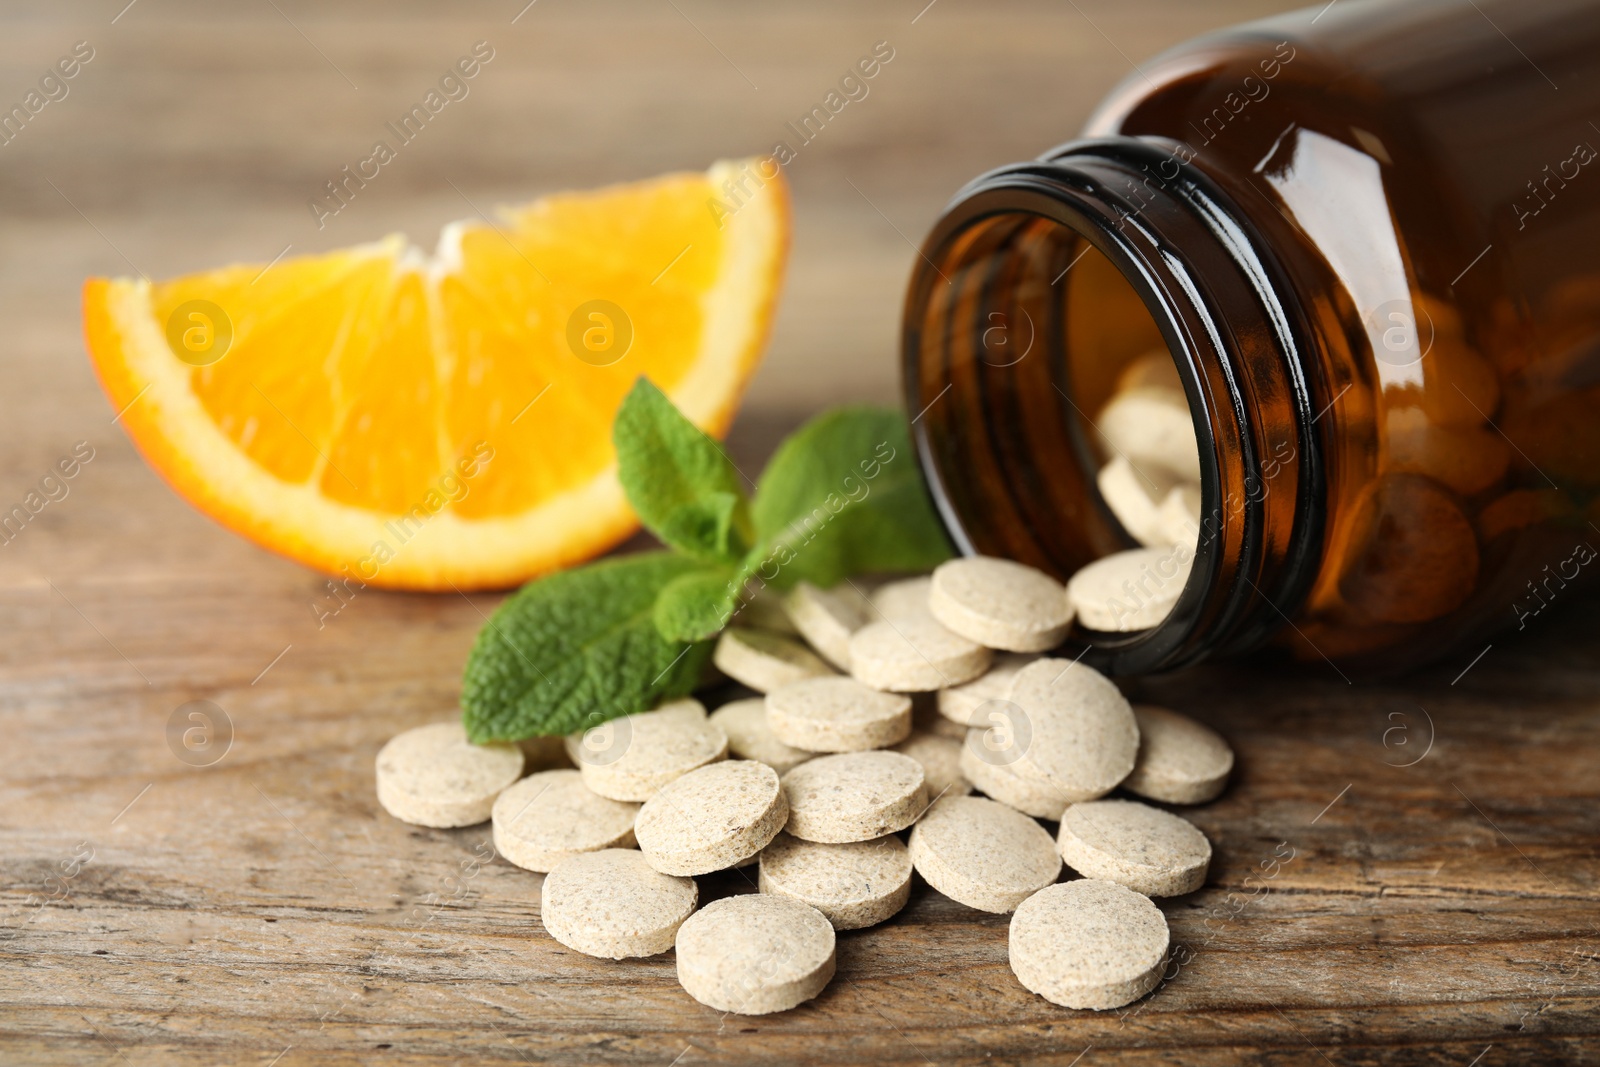 Photo of Bottle with vitamin pills, mint and orange on wooden table, closeup